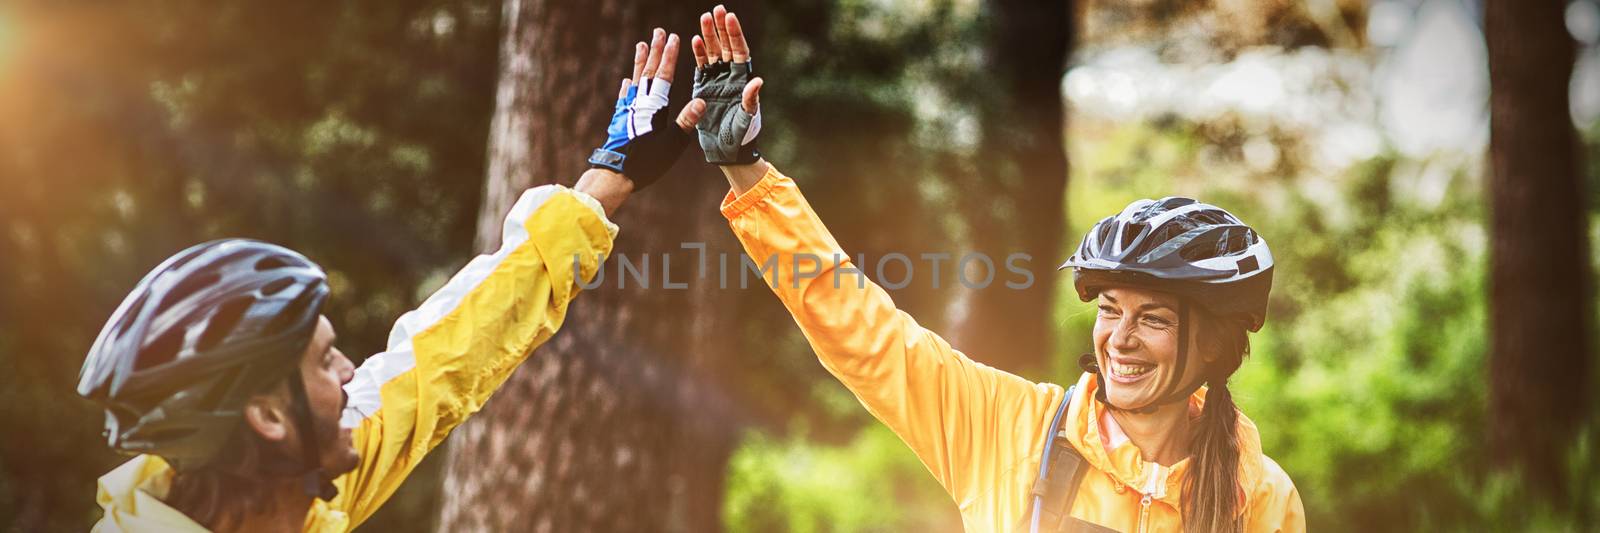 Biker couple giving high five to each other in countryside by Wavebreakmedia